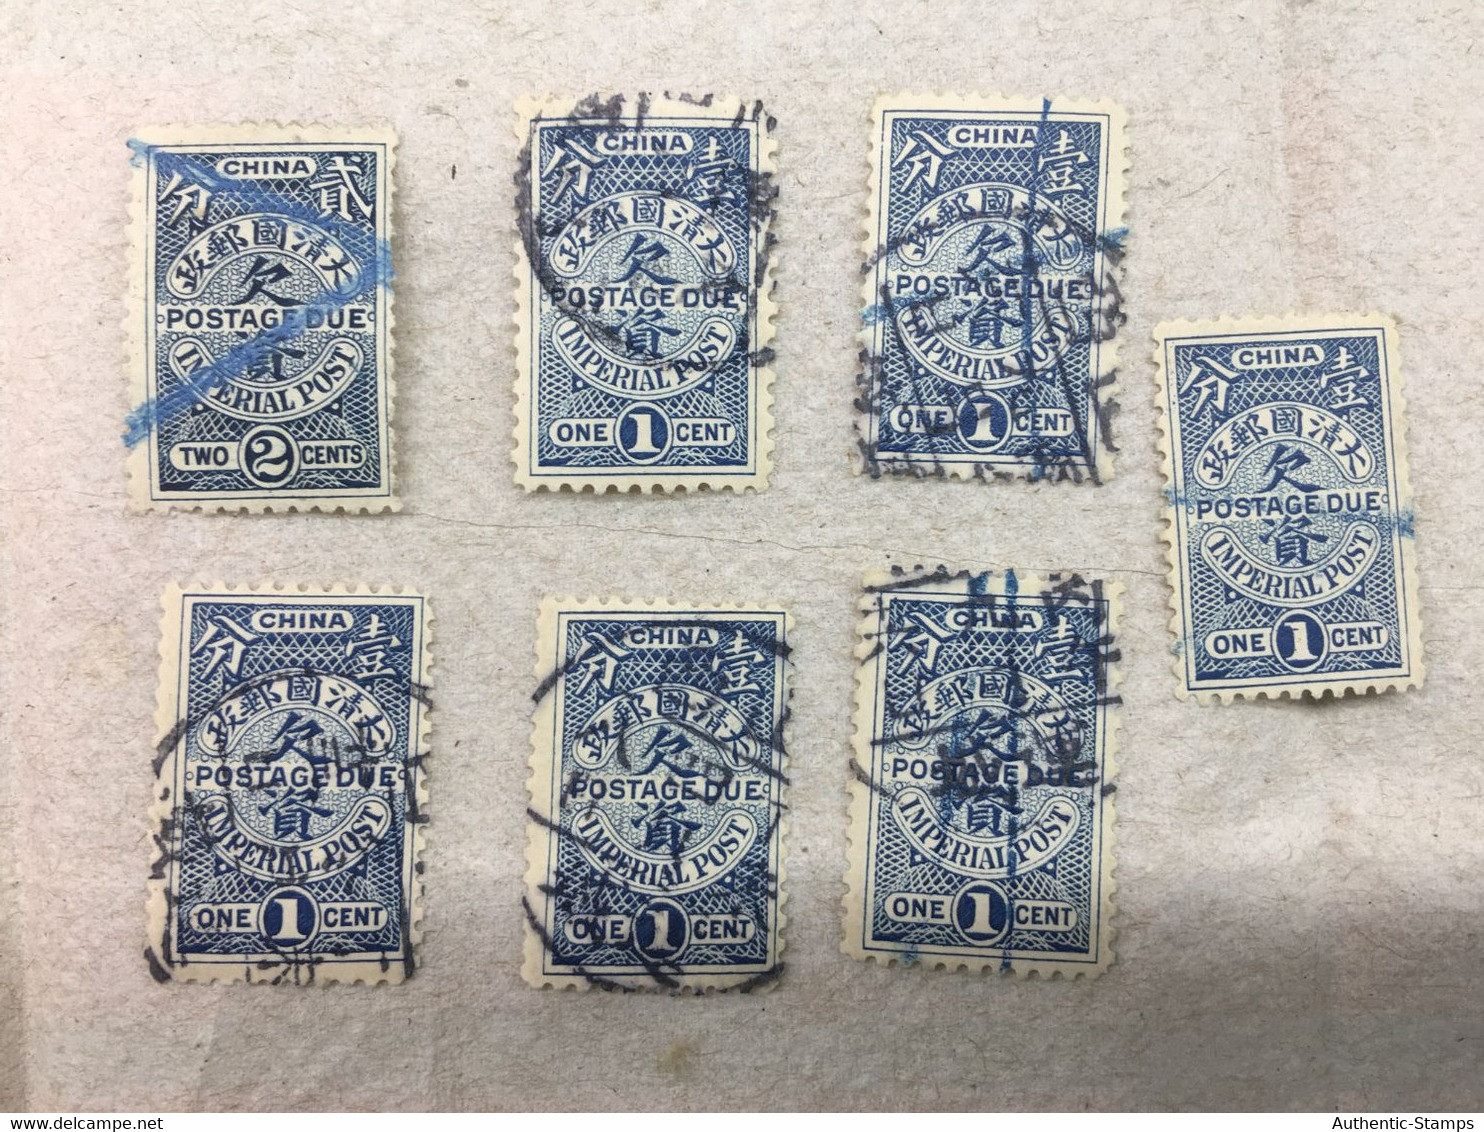 CHINA STAMP, Imperial, USED, TIMBRO, STEMPEL, CINA, CHINE, LIST 5192 - Gebruikt